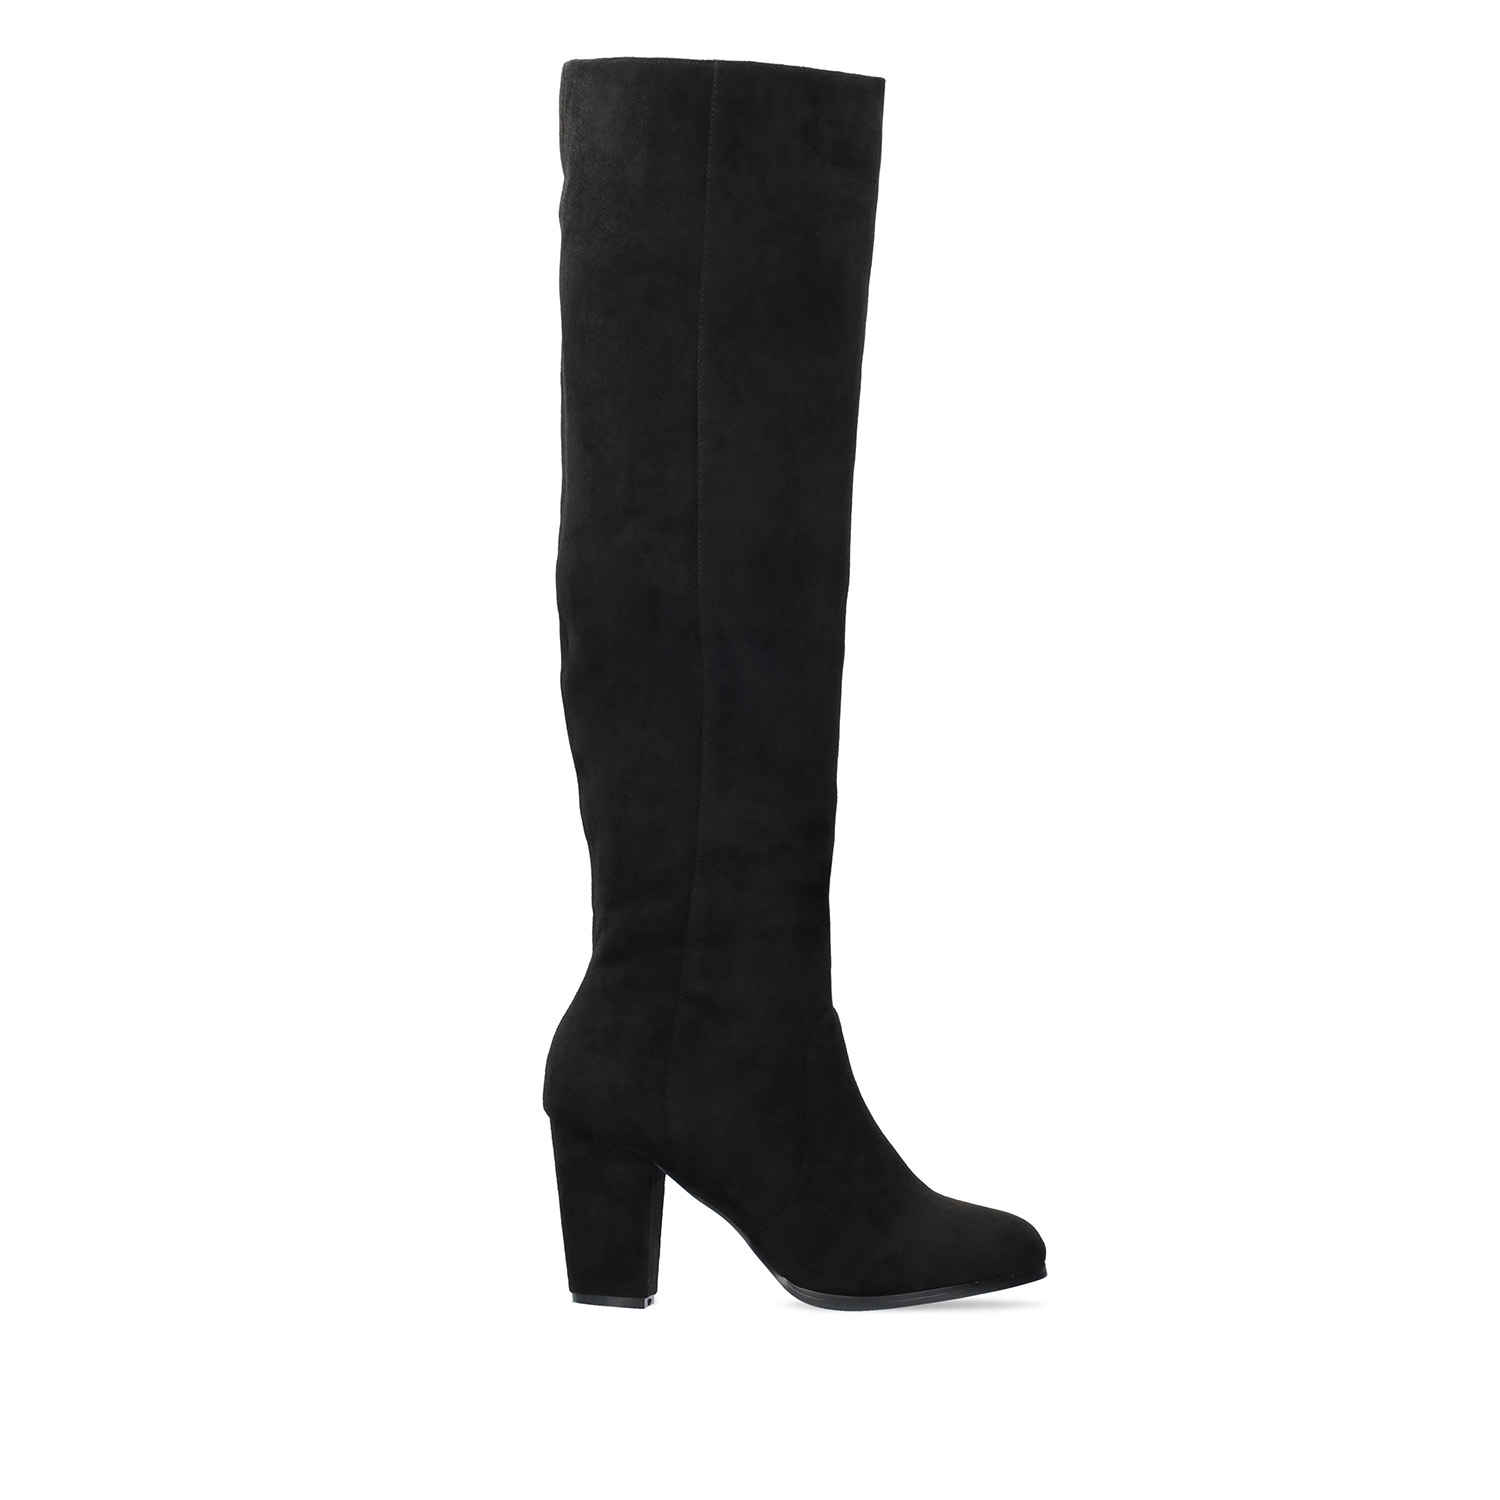 Heeled knee-high boots in black faux suede. 